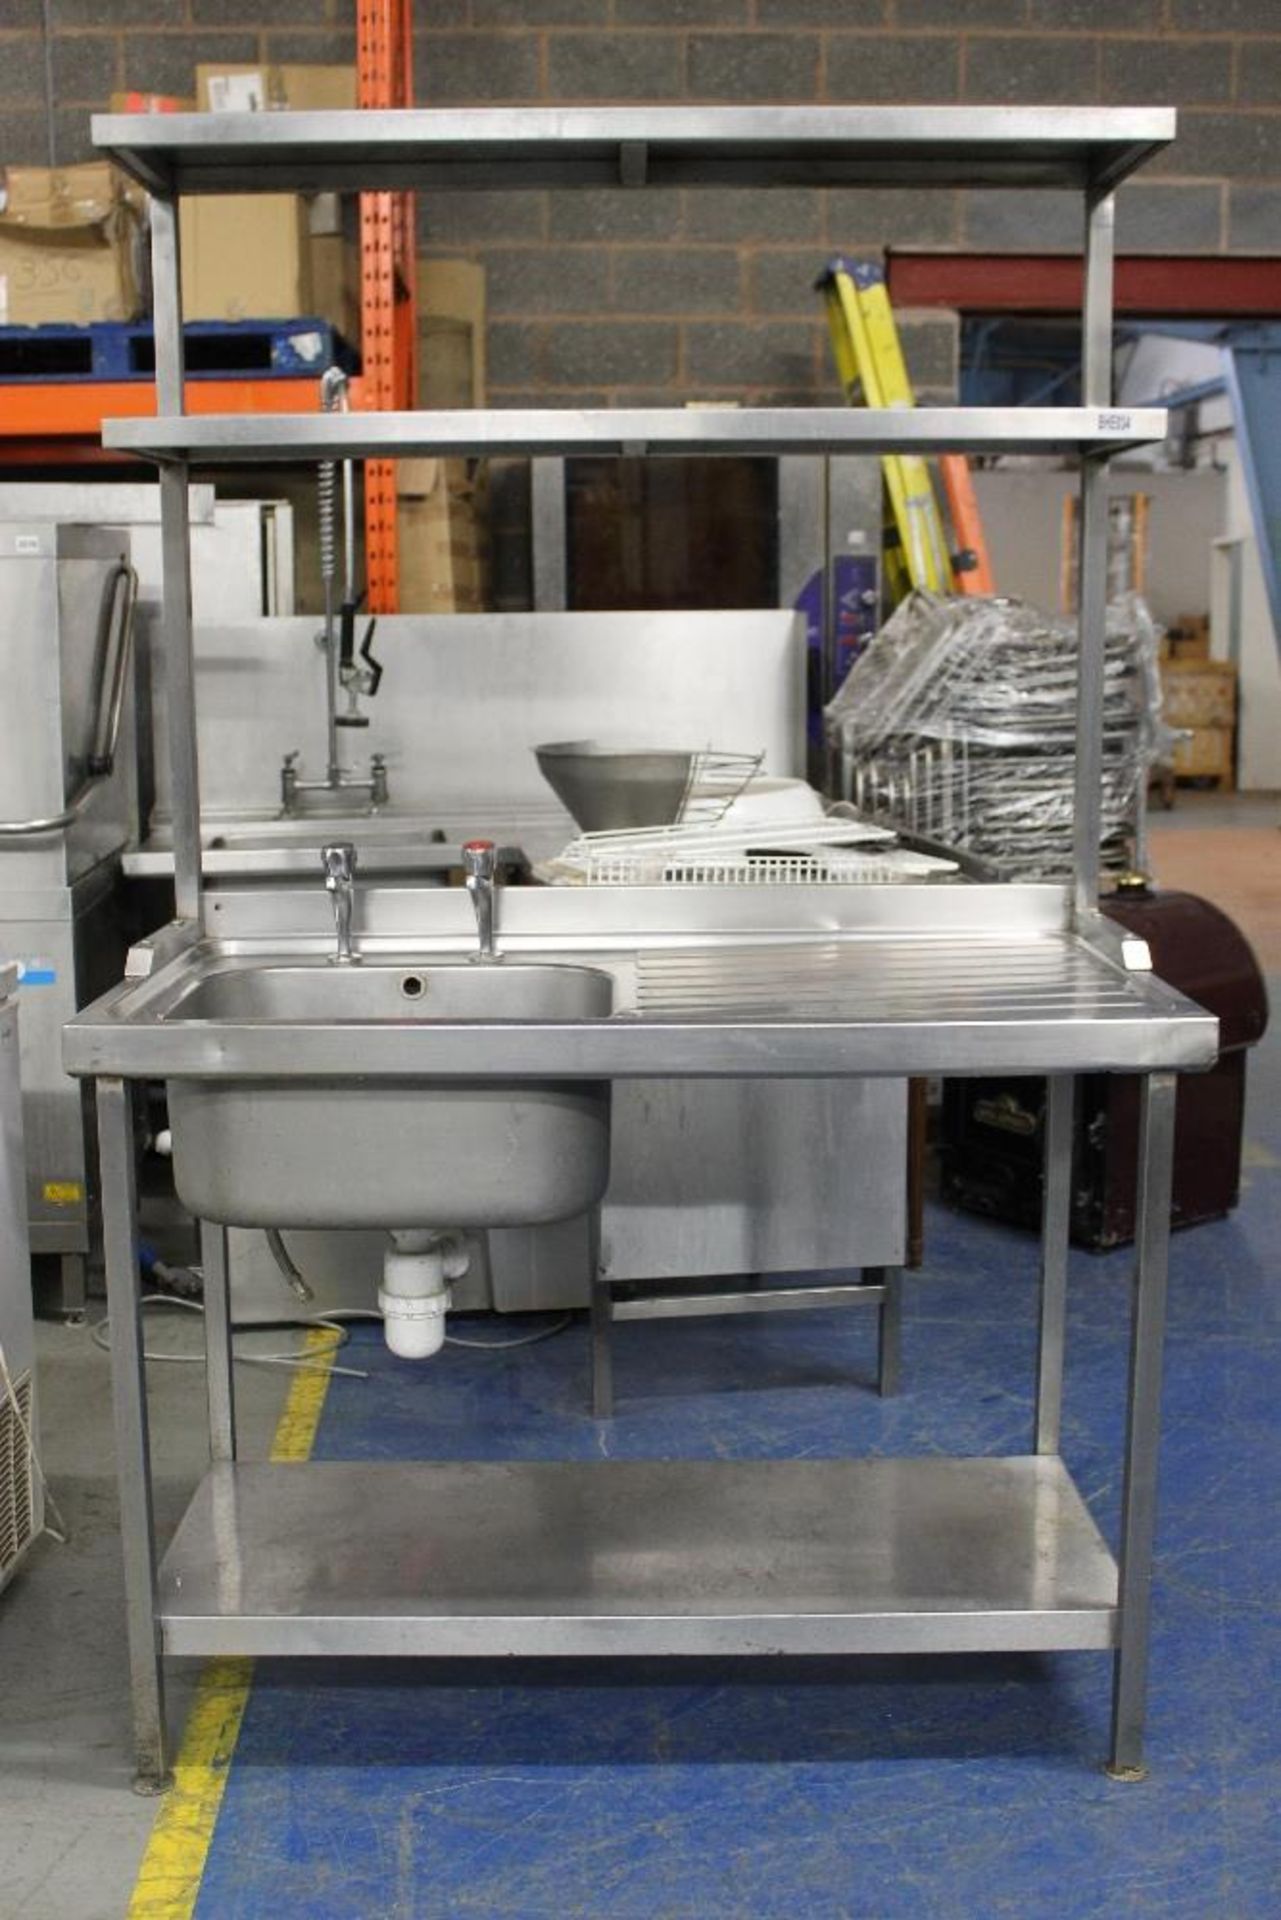 Stainless Steel Single Bowl Catering Sink with Under Shelf + 2 Upper Shelf Units – W120cm x H186cm x - Image 3 of 3